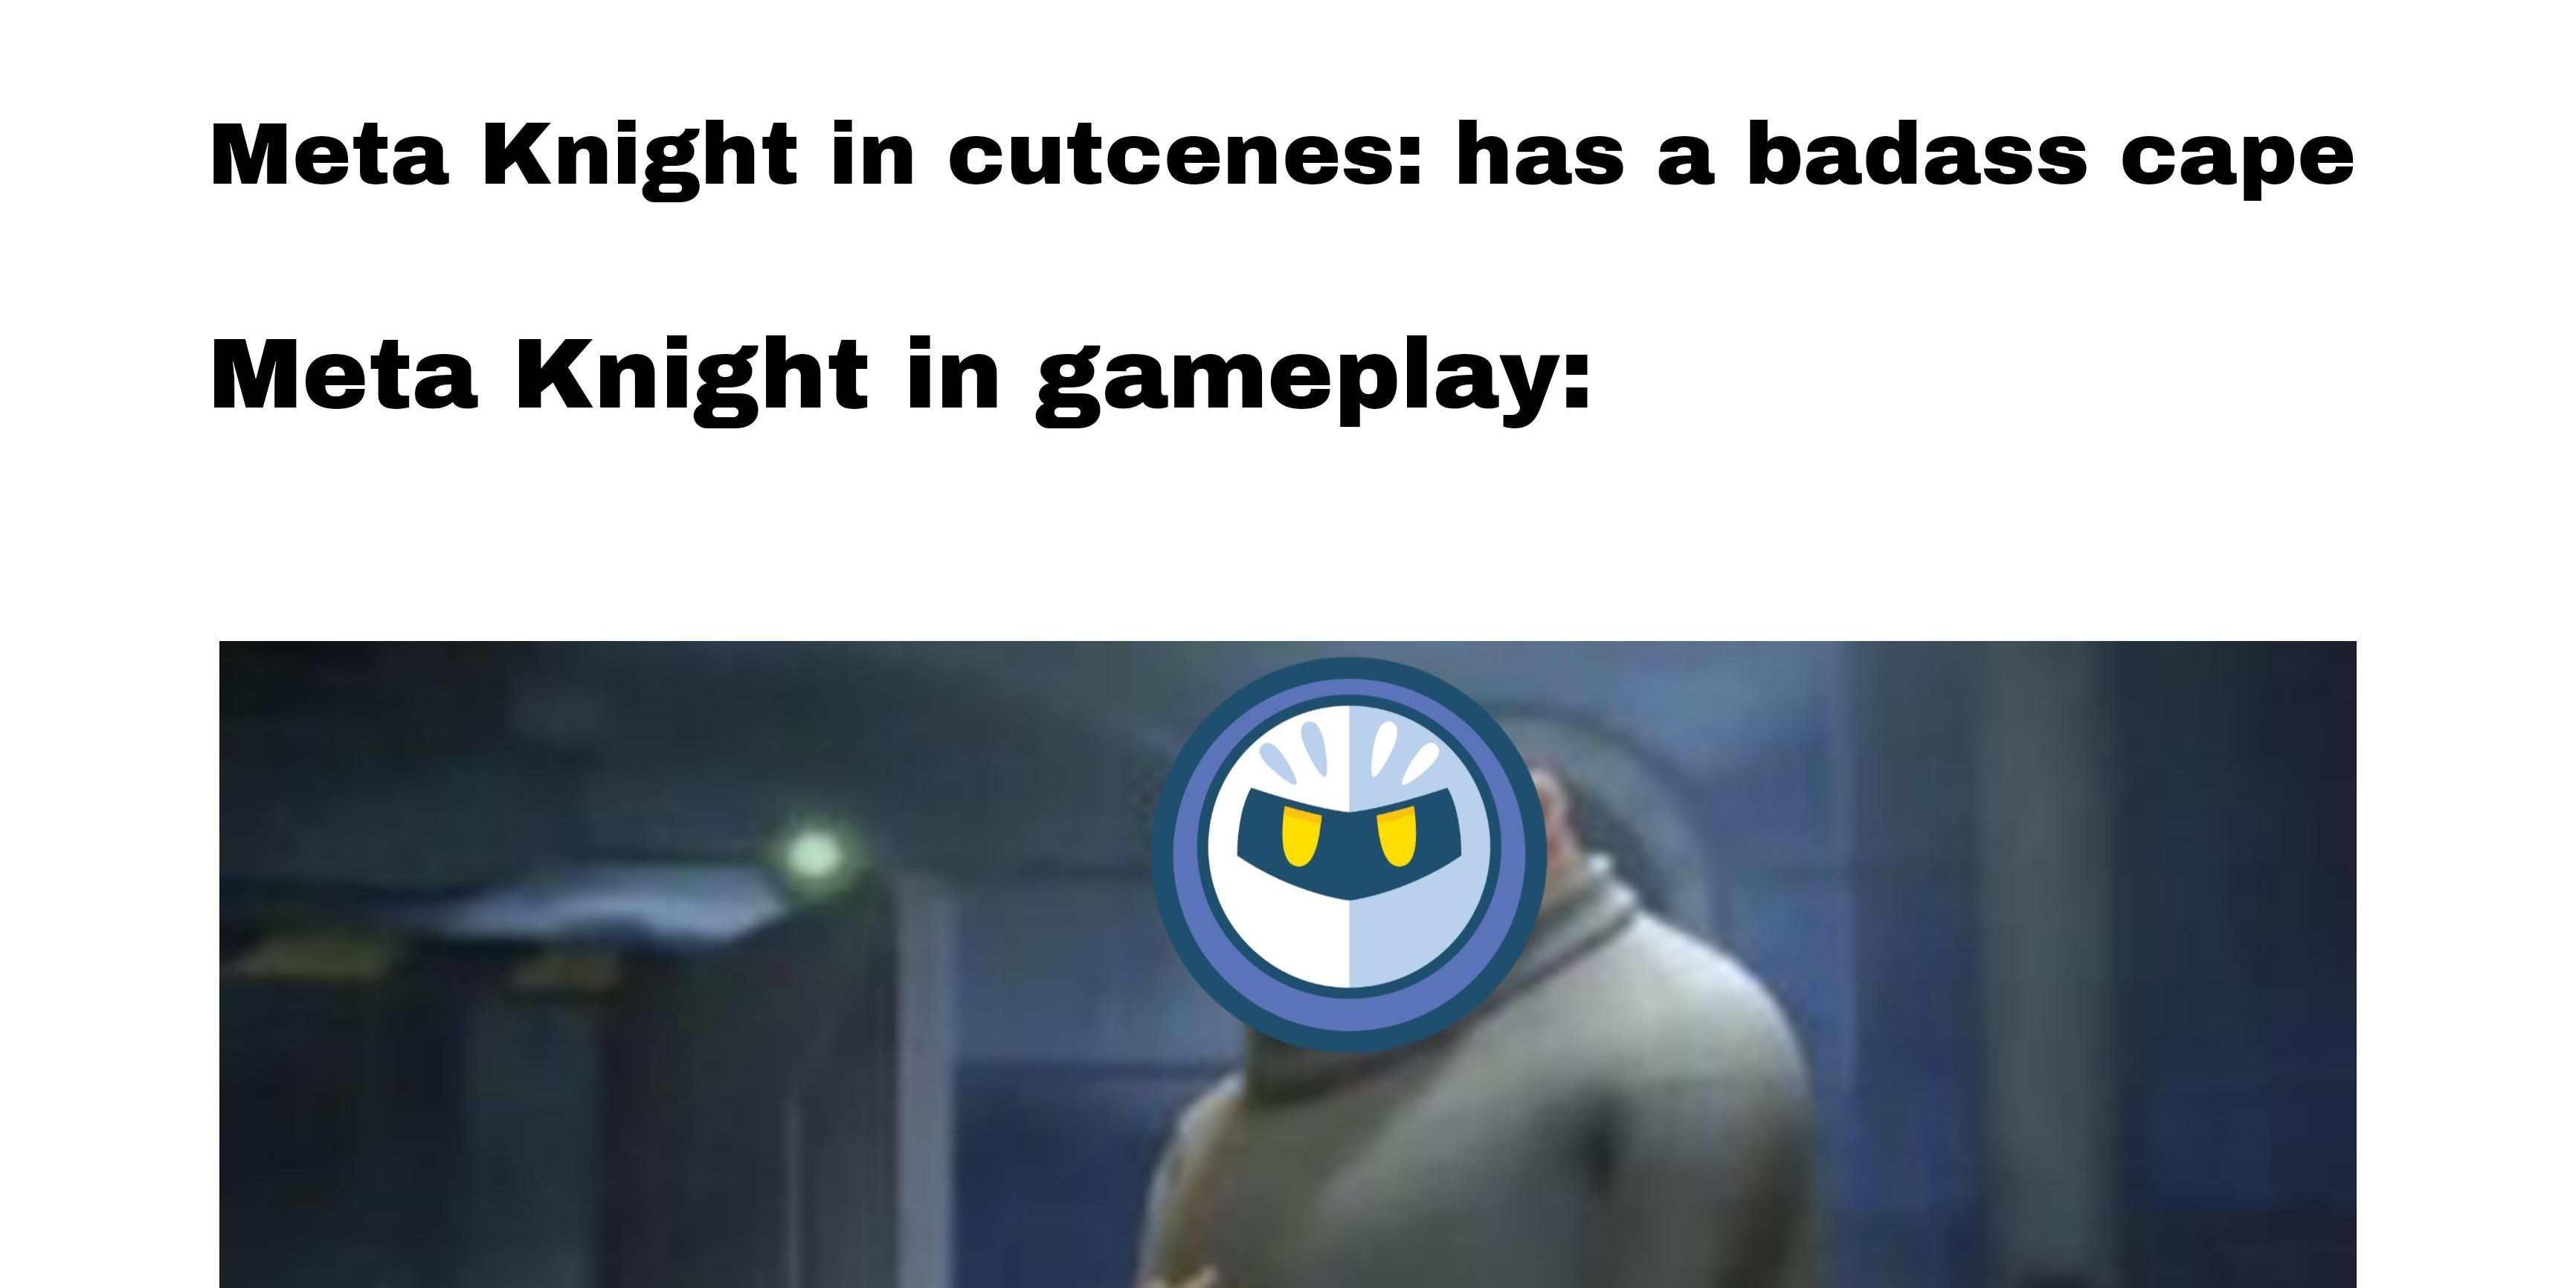 Top text: "Meta Knight in Cutscenes: has a badass cap. Meta Knight in gameplay:" Bottom image is Gru with Meta Knight's face transposed on him.